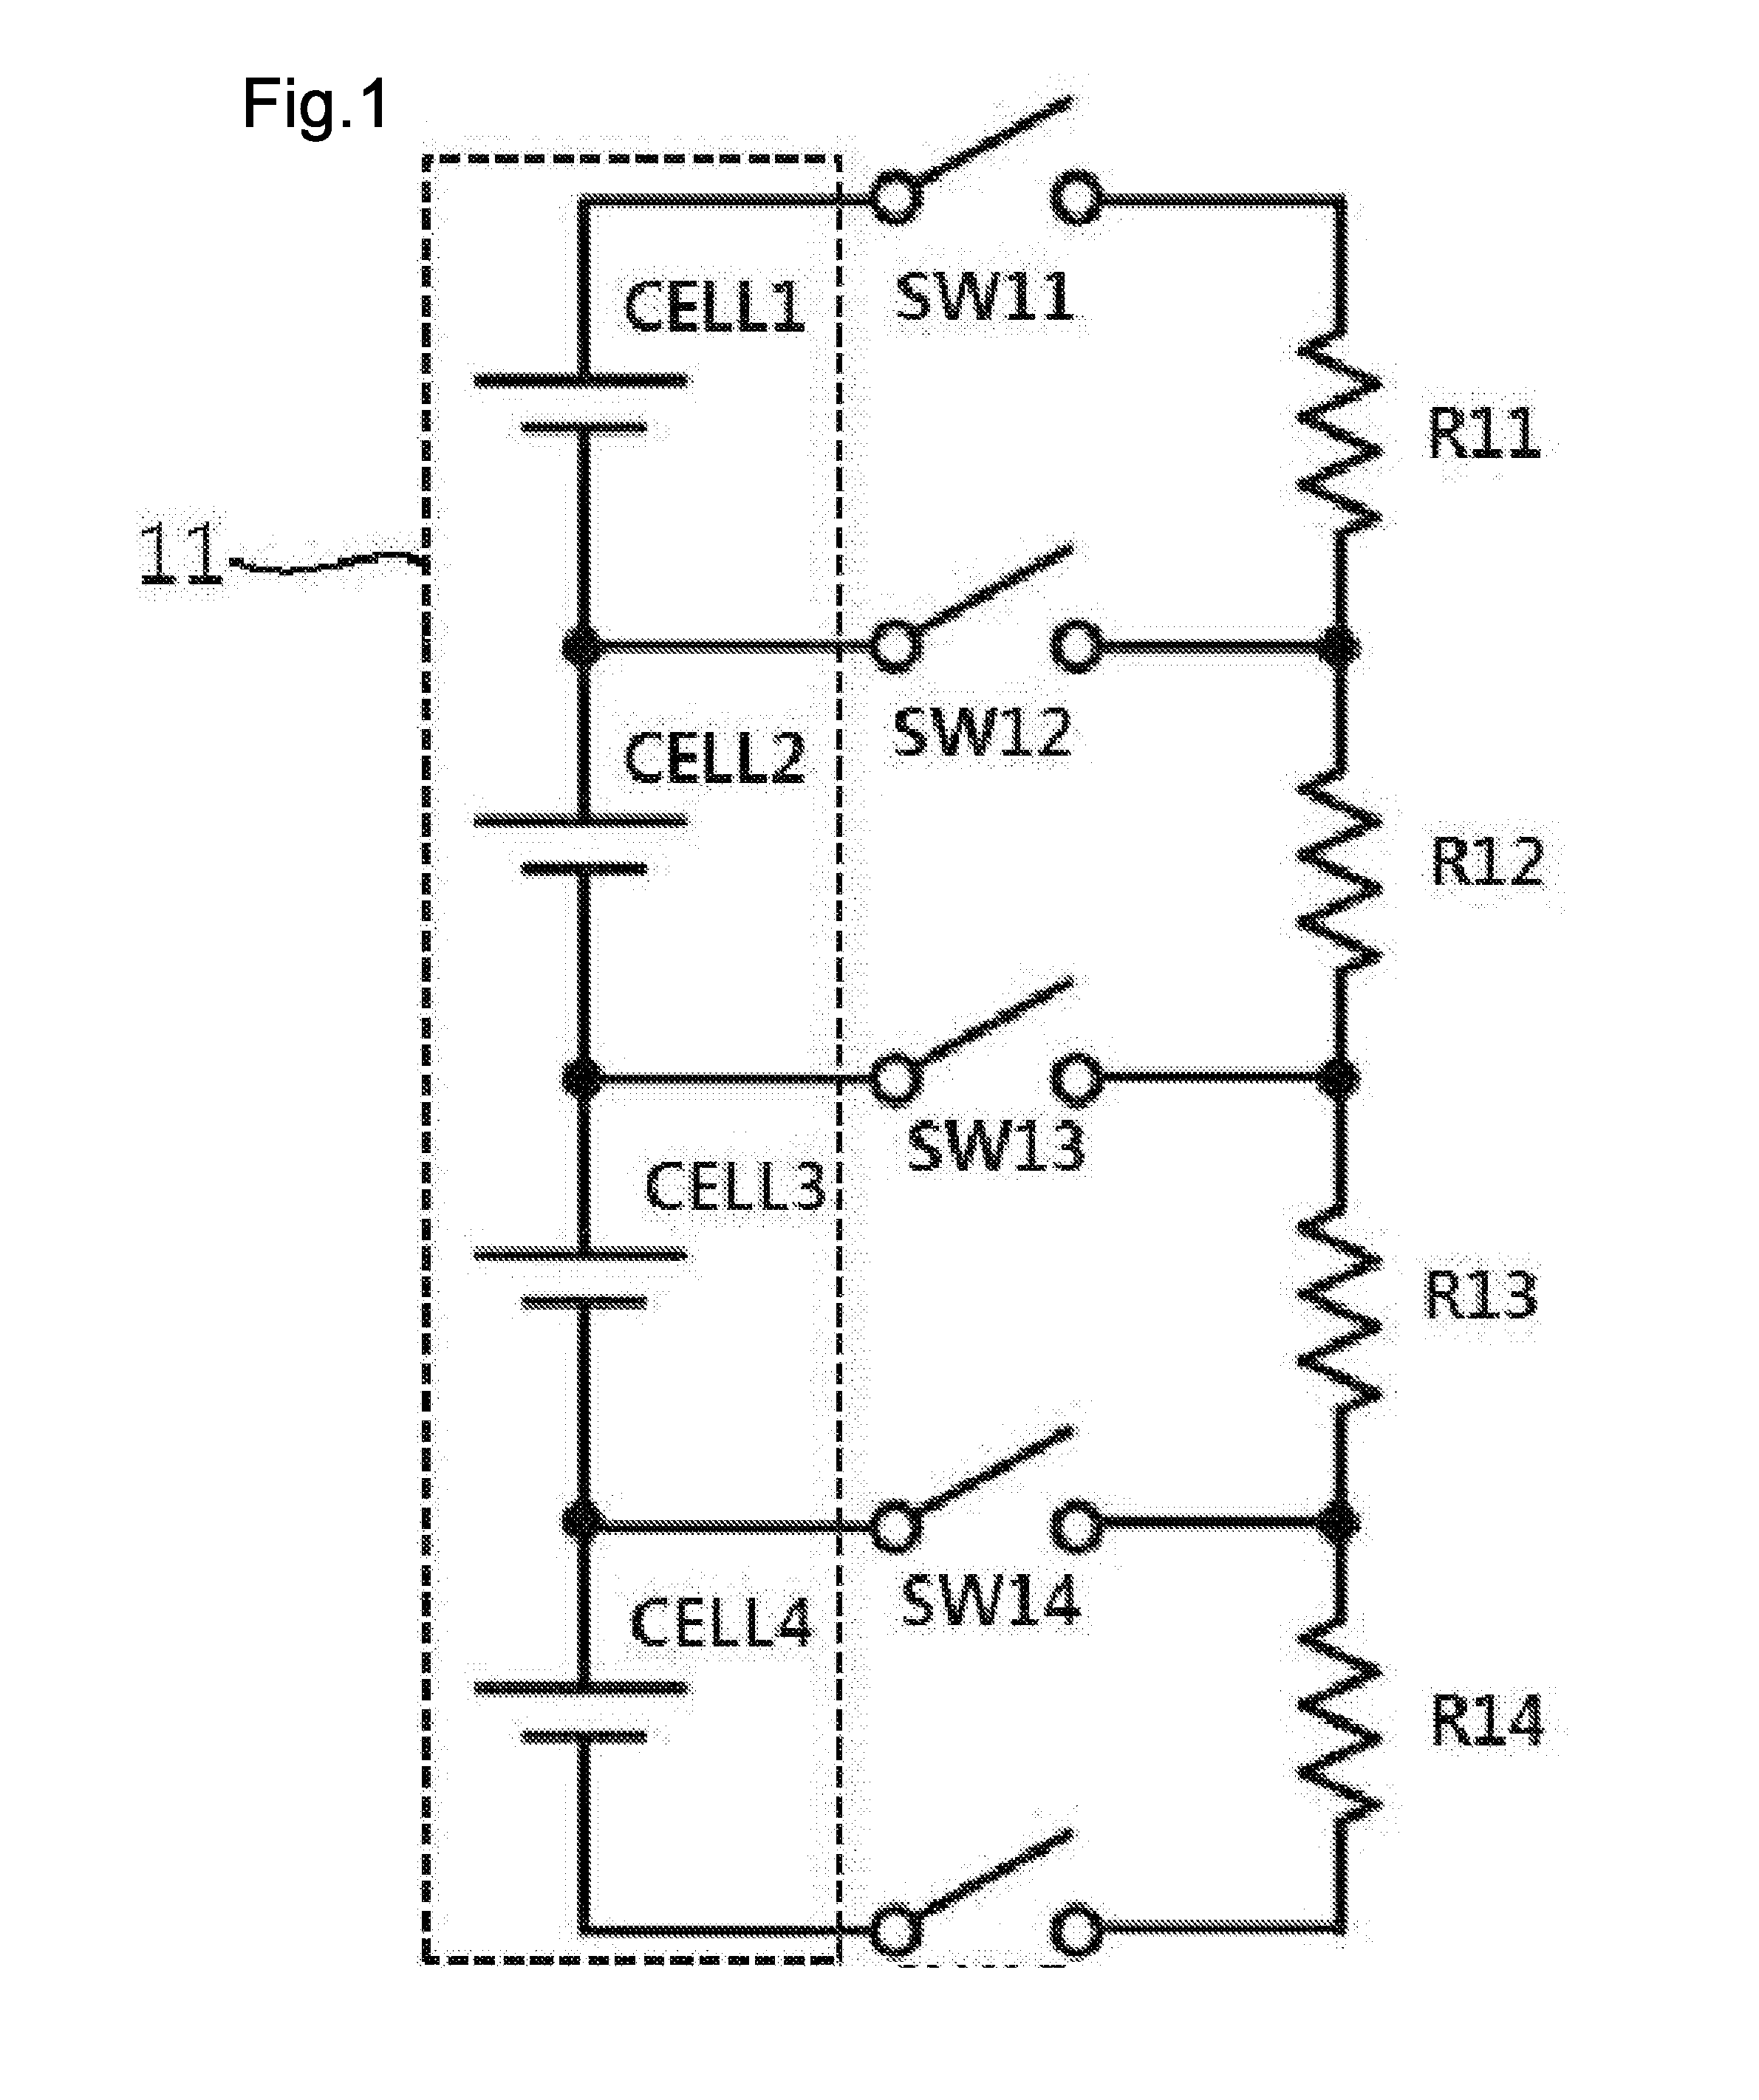 Balancing control circuit for battery cell module using lc series resonant circuit